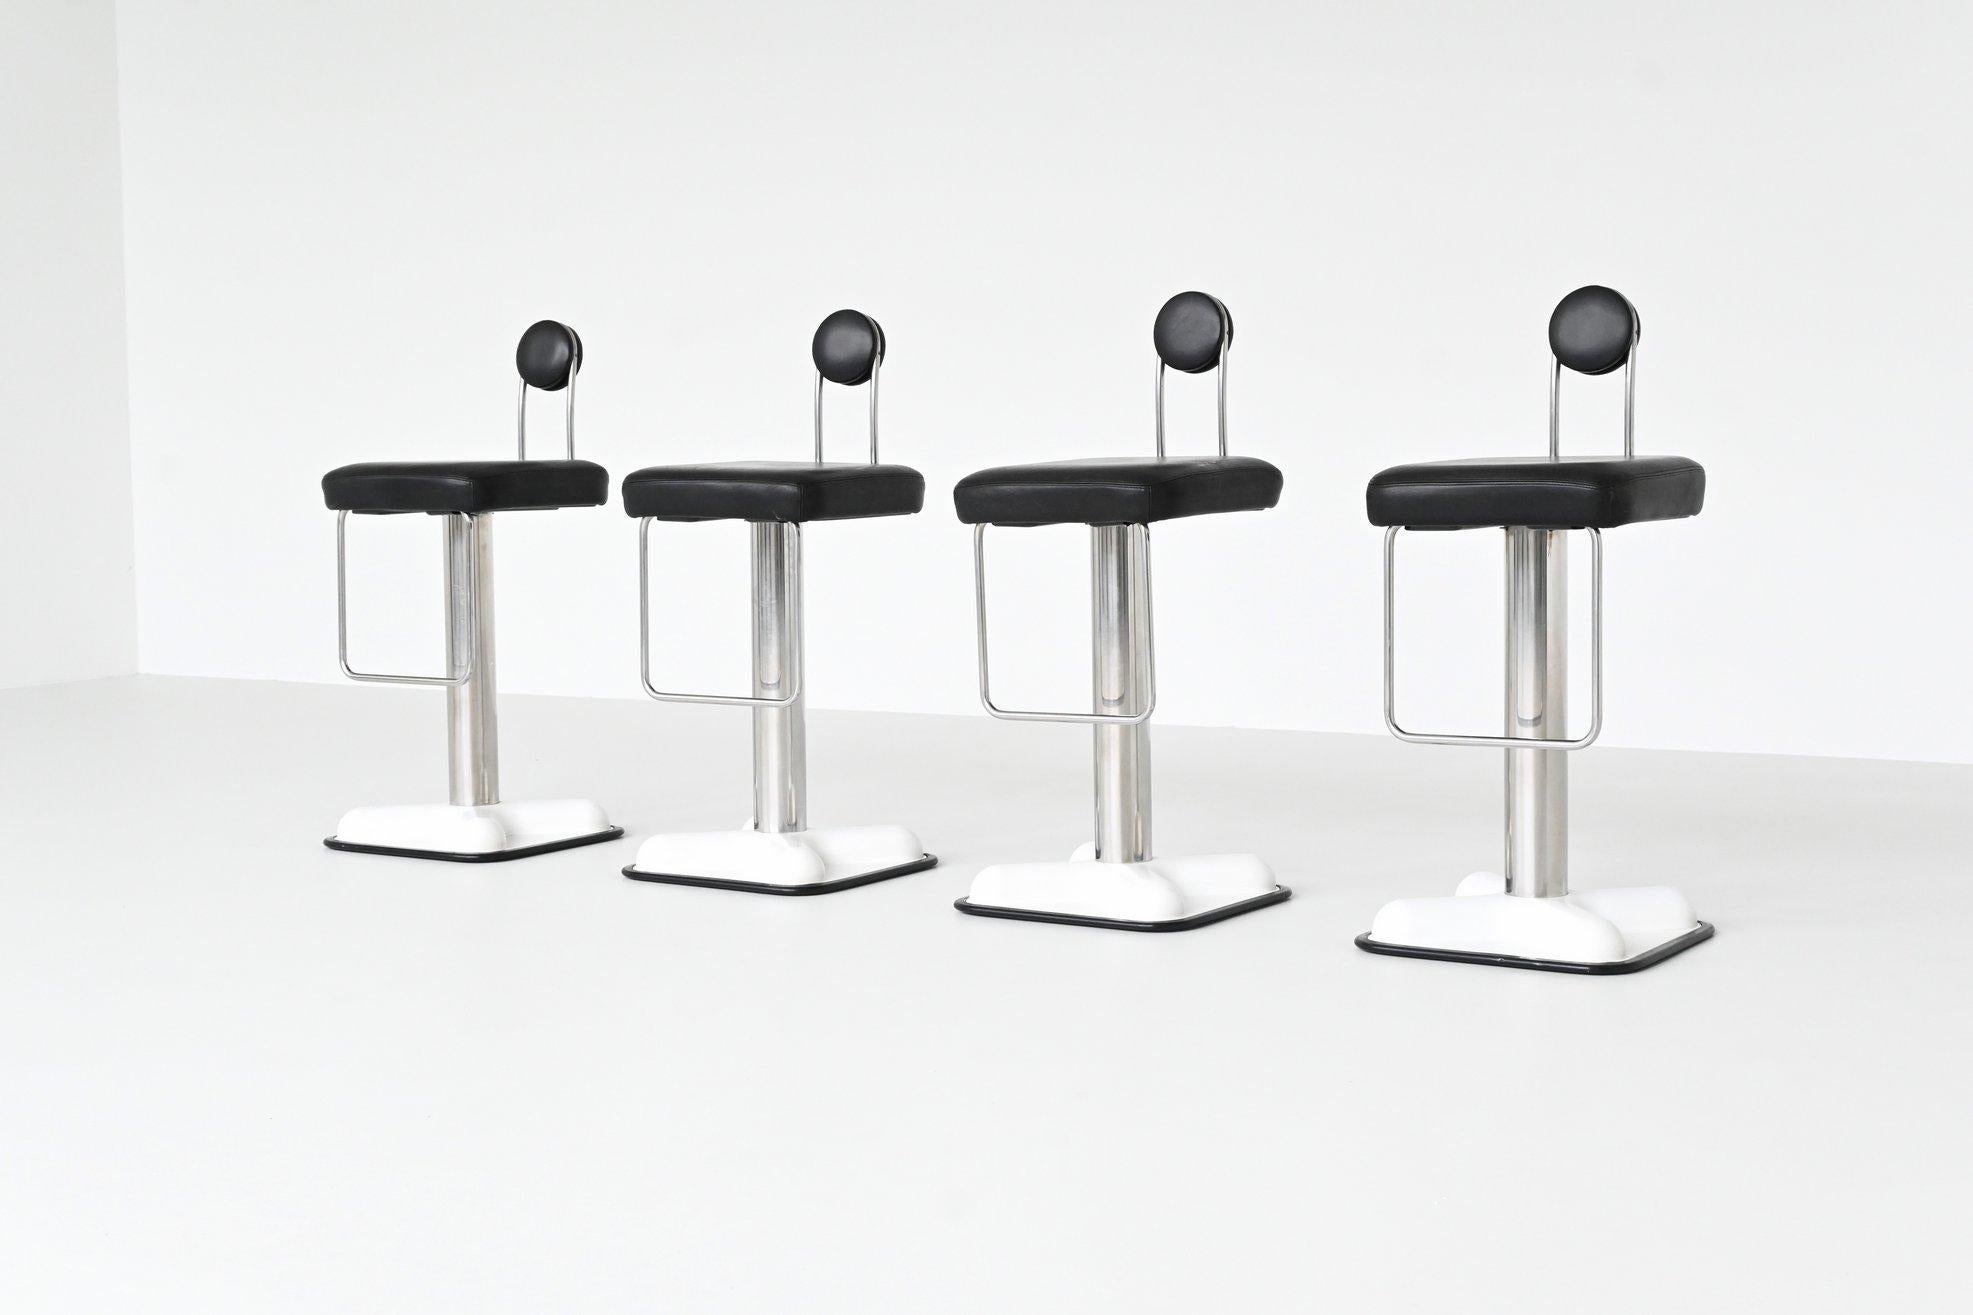 Iconic set of four bar stools model Birillo designed by Joe Colombo for Zanotta, Italy 1971. These pop art bar stools feature a white fibreglass base with black rubber edge, heavy duty chromed metal pole shaft with foot rest and black leather